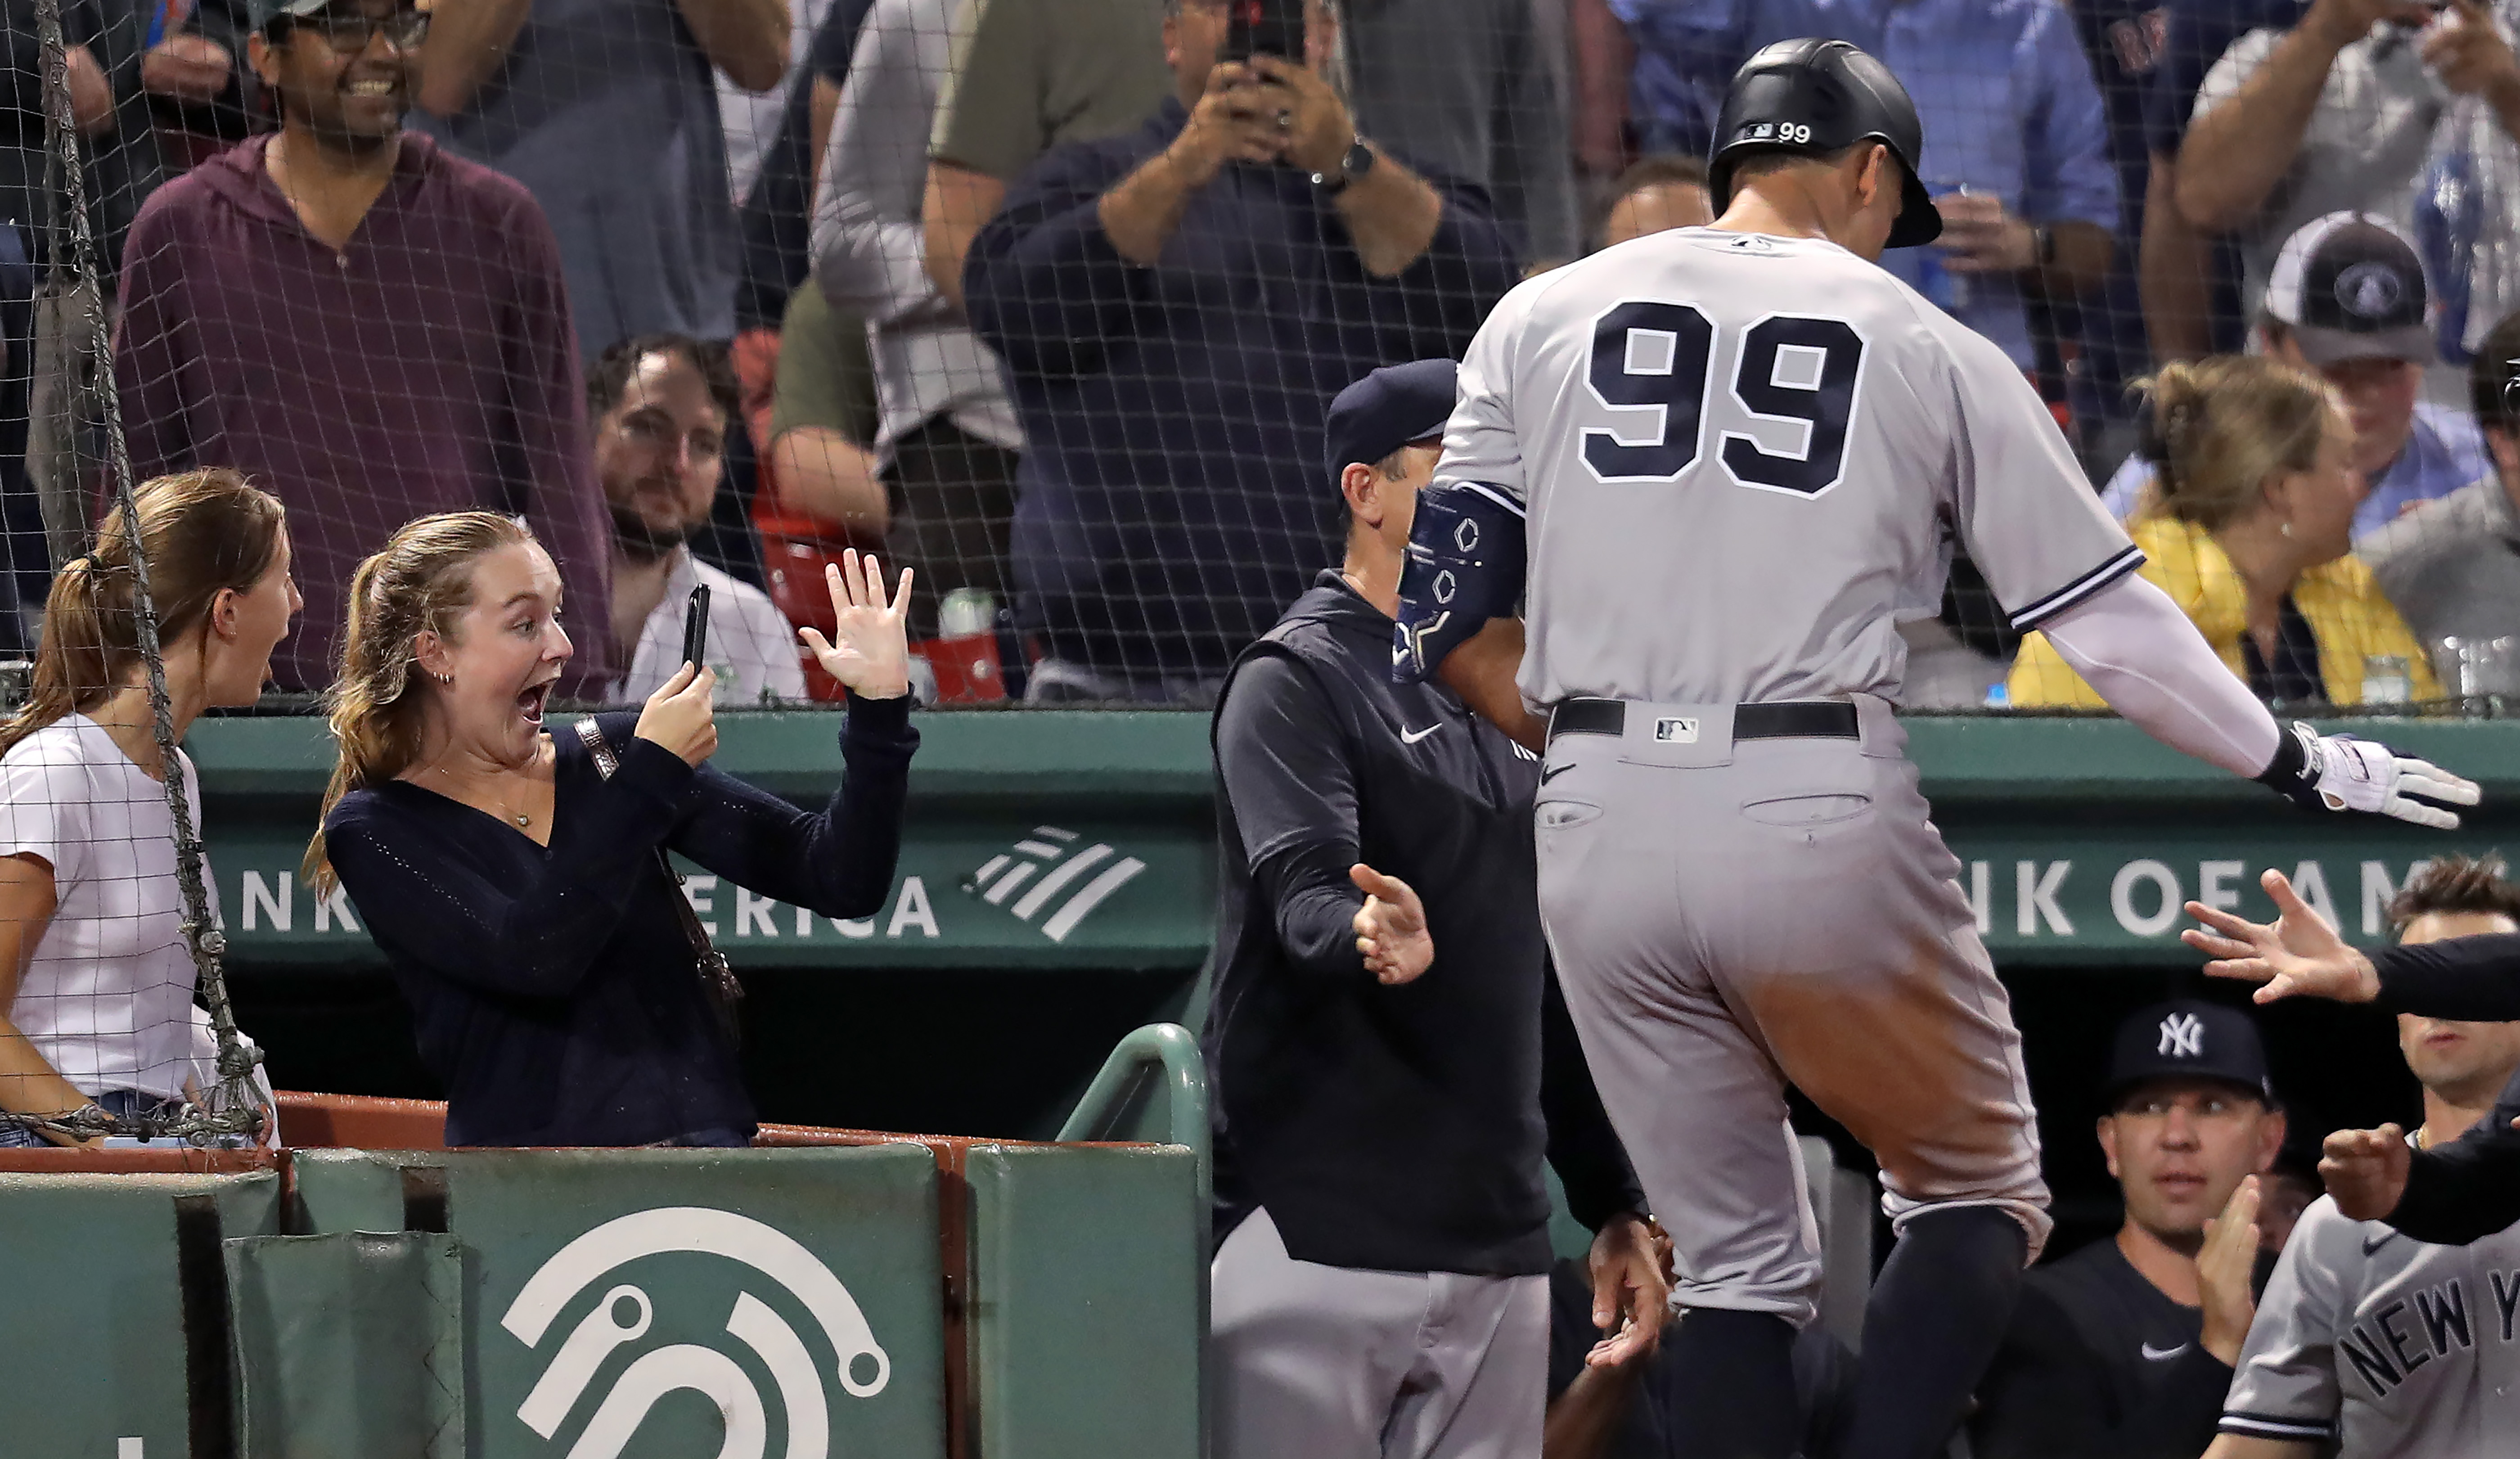 Aaron Judge hits 56th and 57th home runs against Red Sox at Fenway